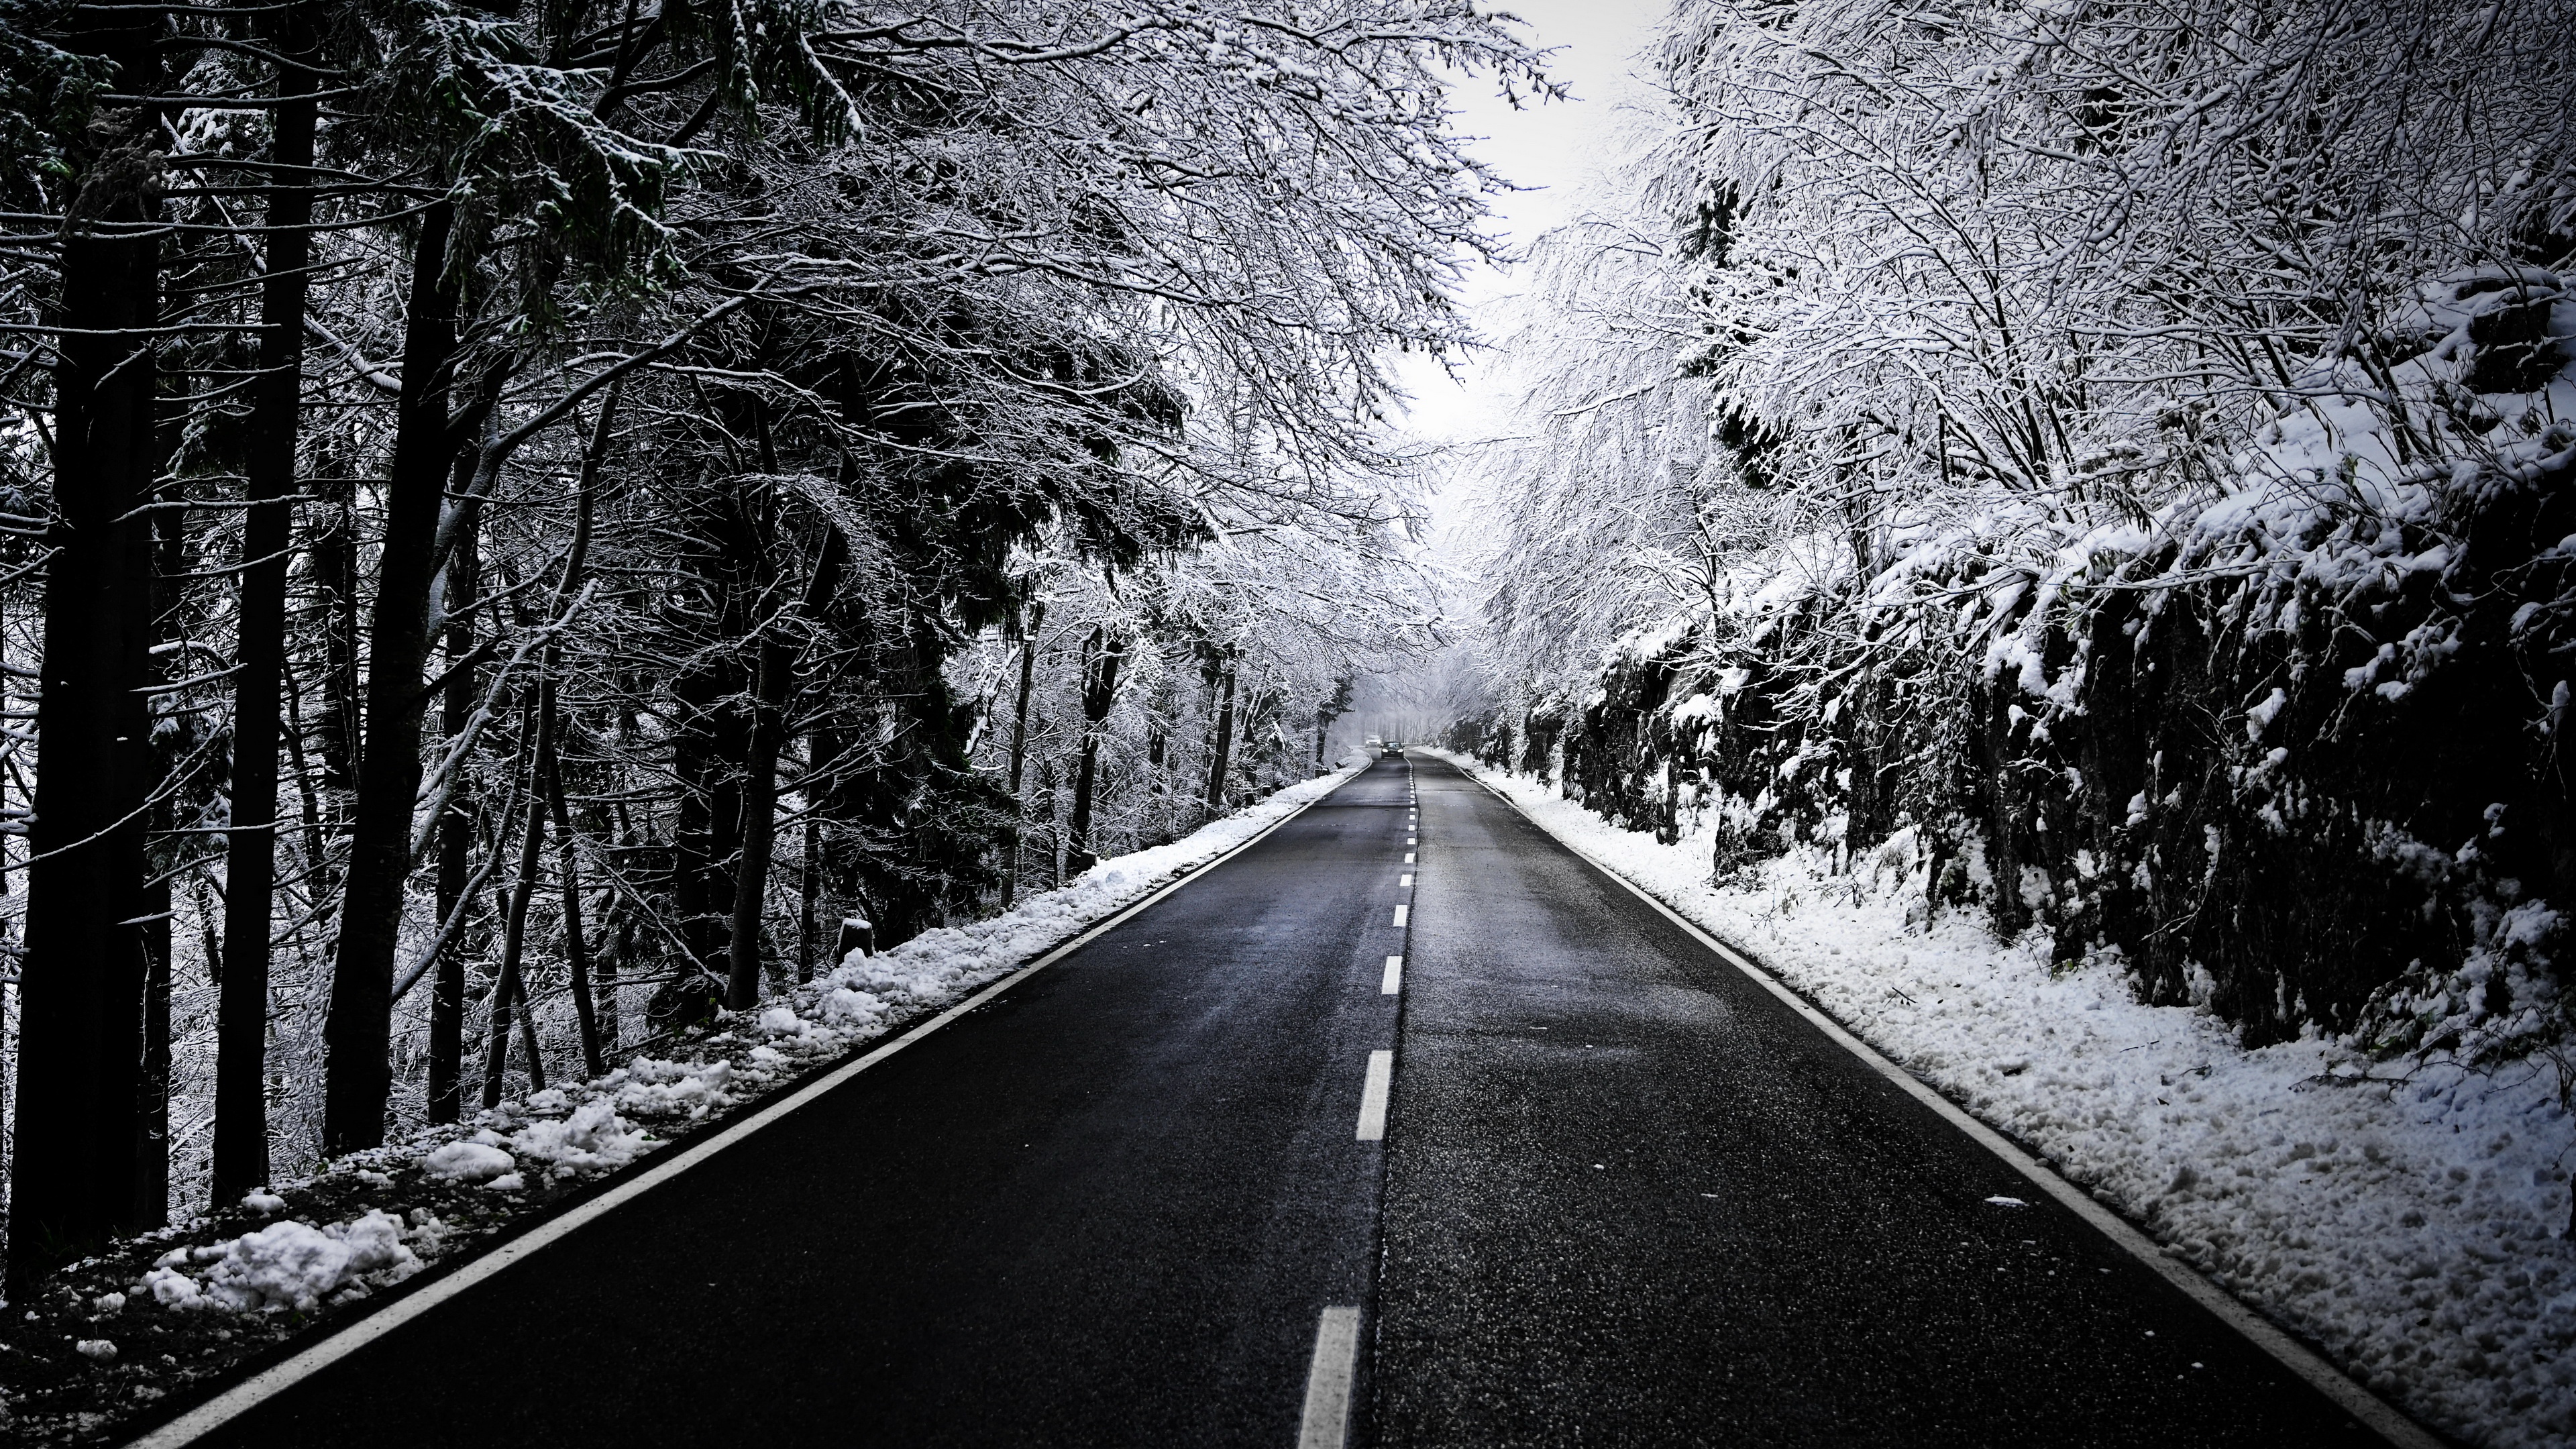 Asphalt road along the forest in the winter season